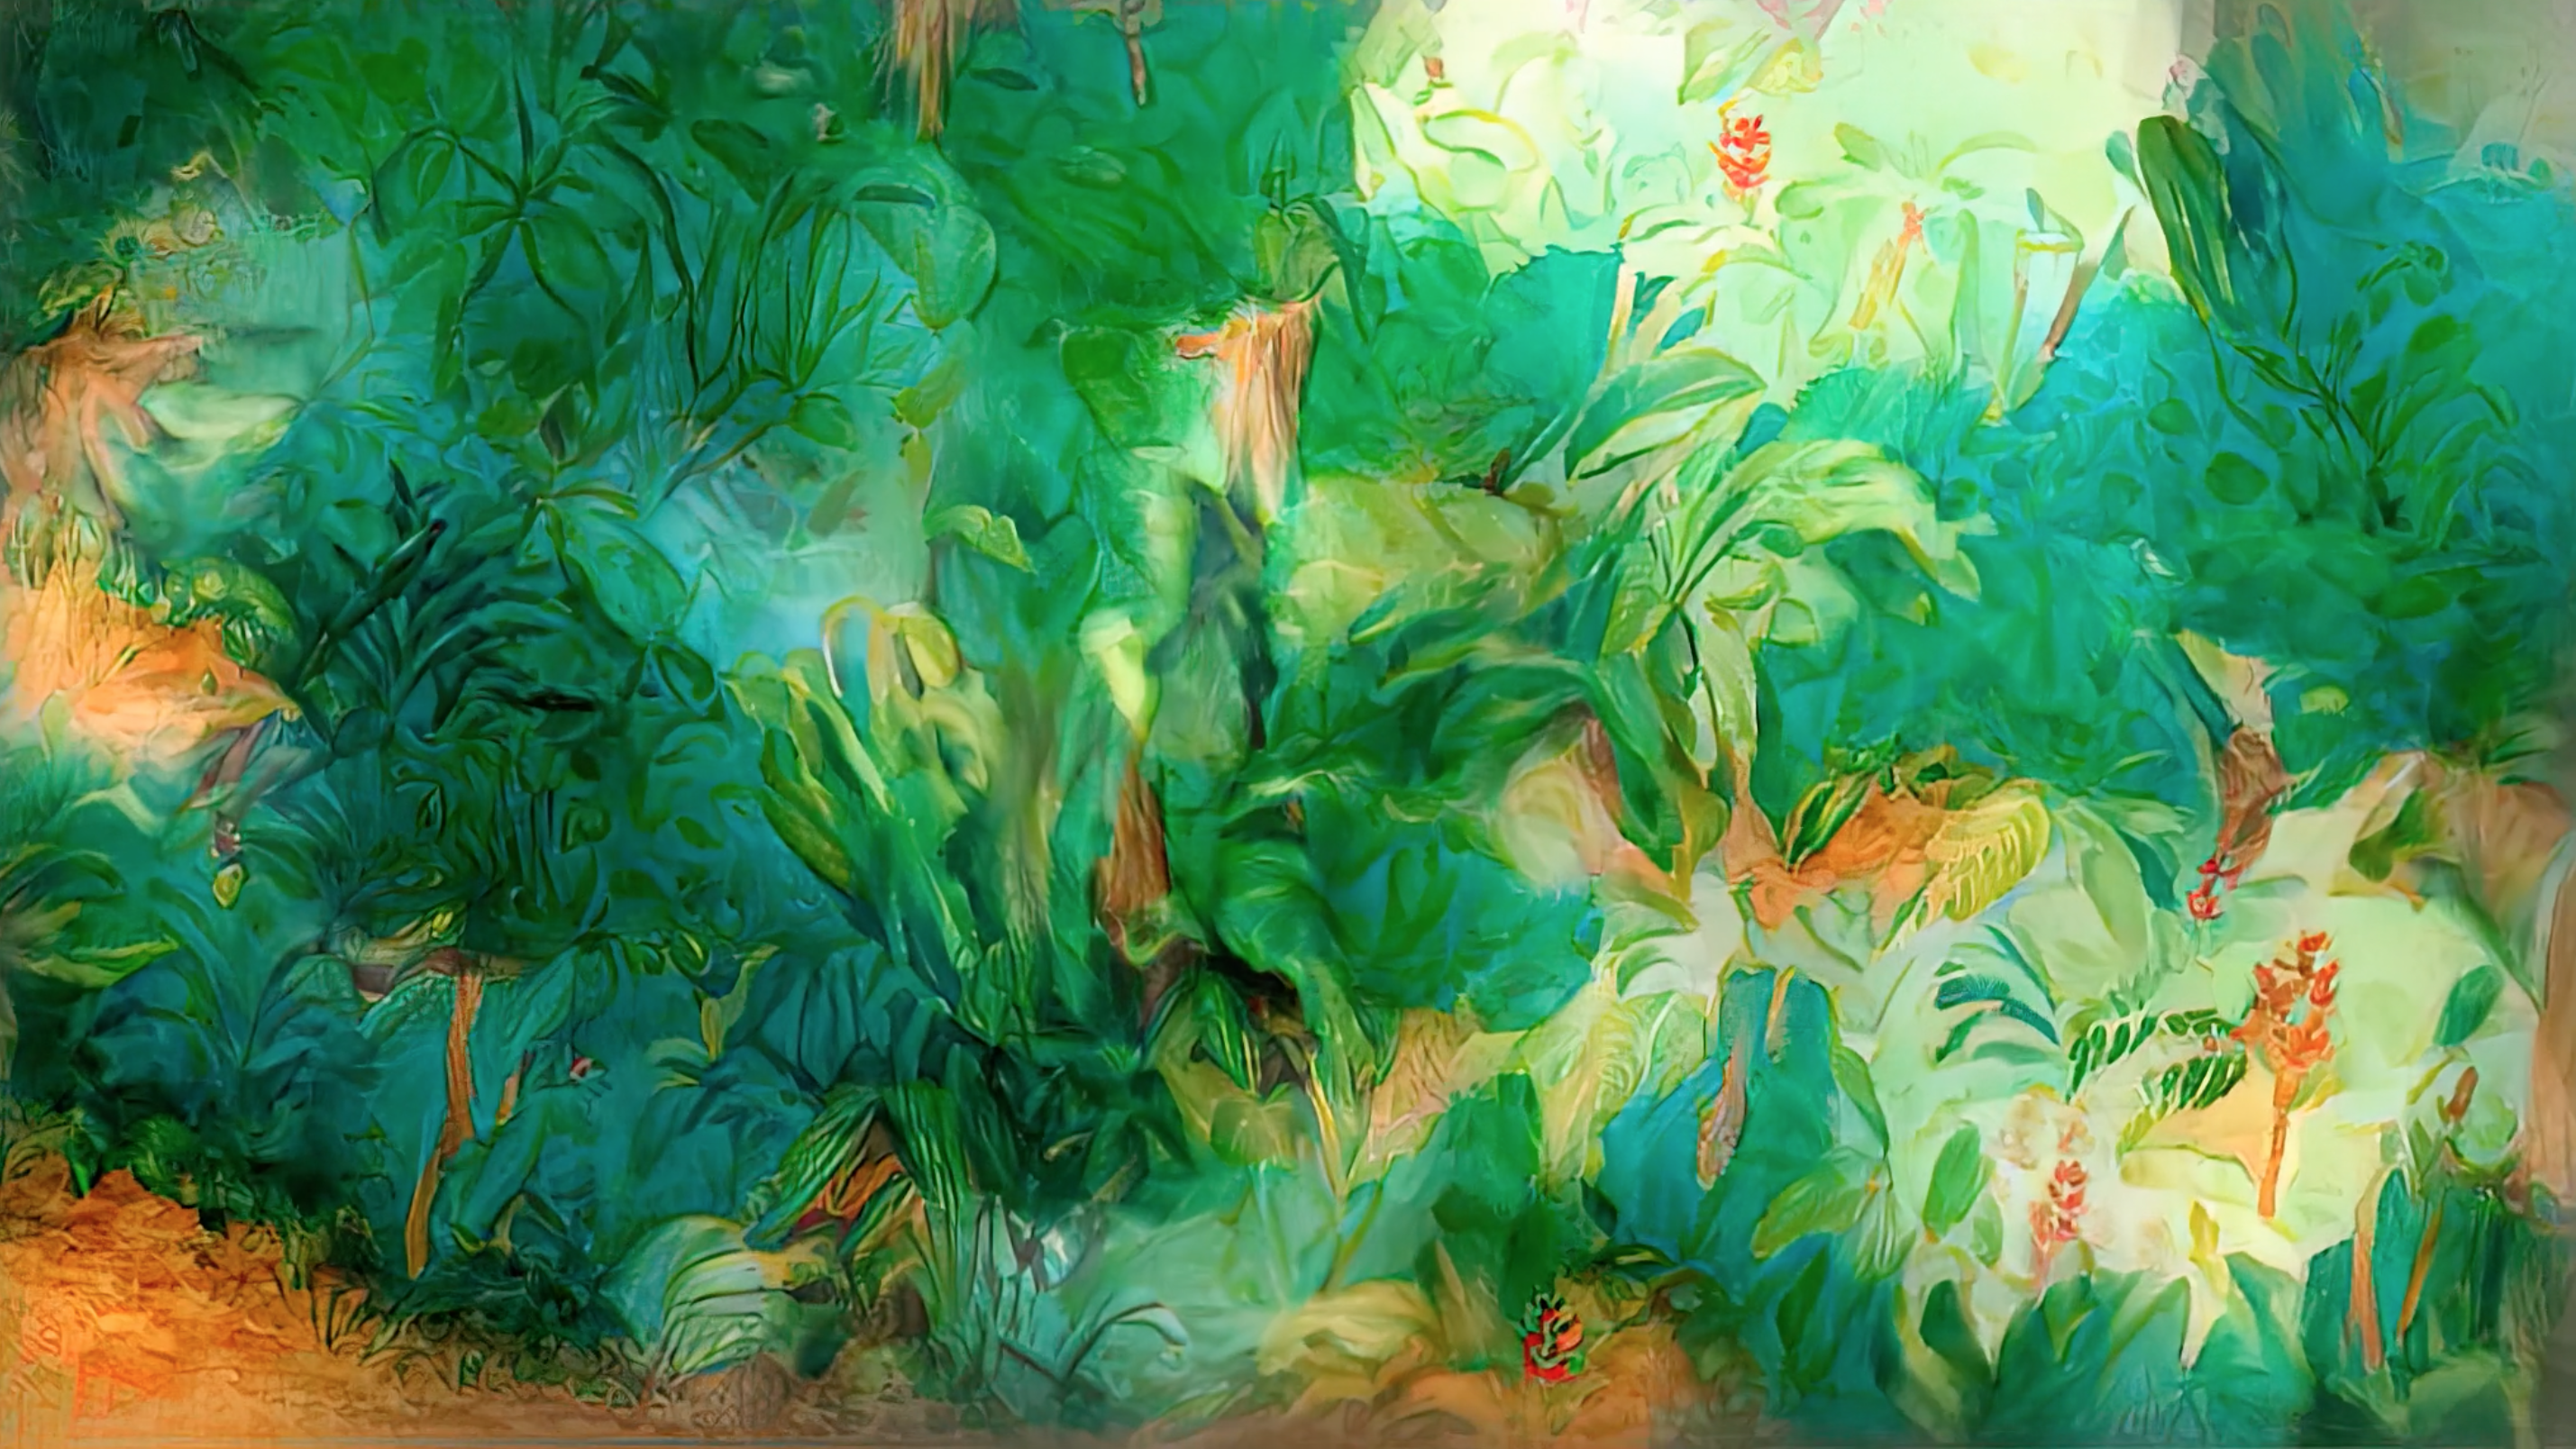 Neural Style Transfer created using the previous illustration scenario as a base